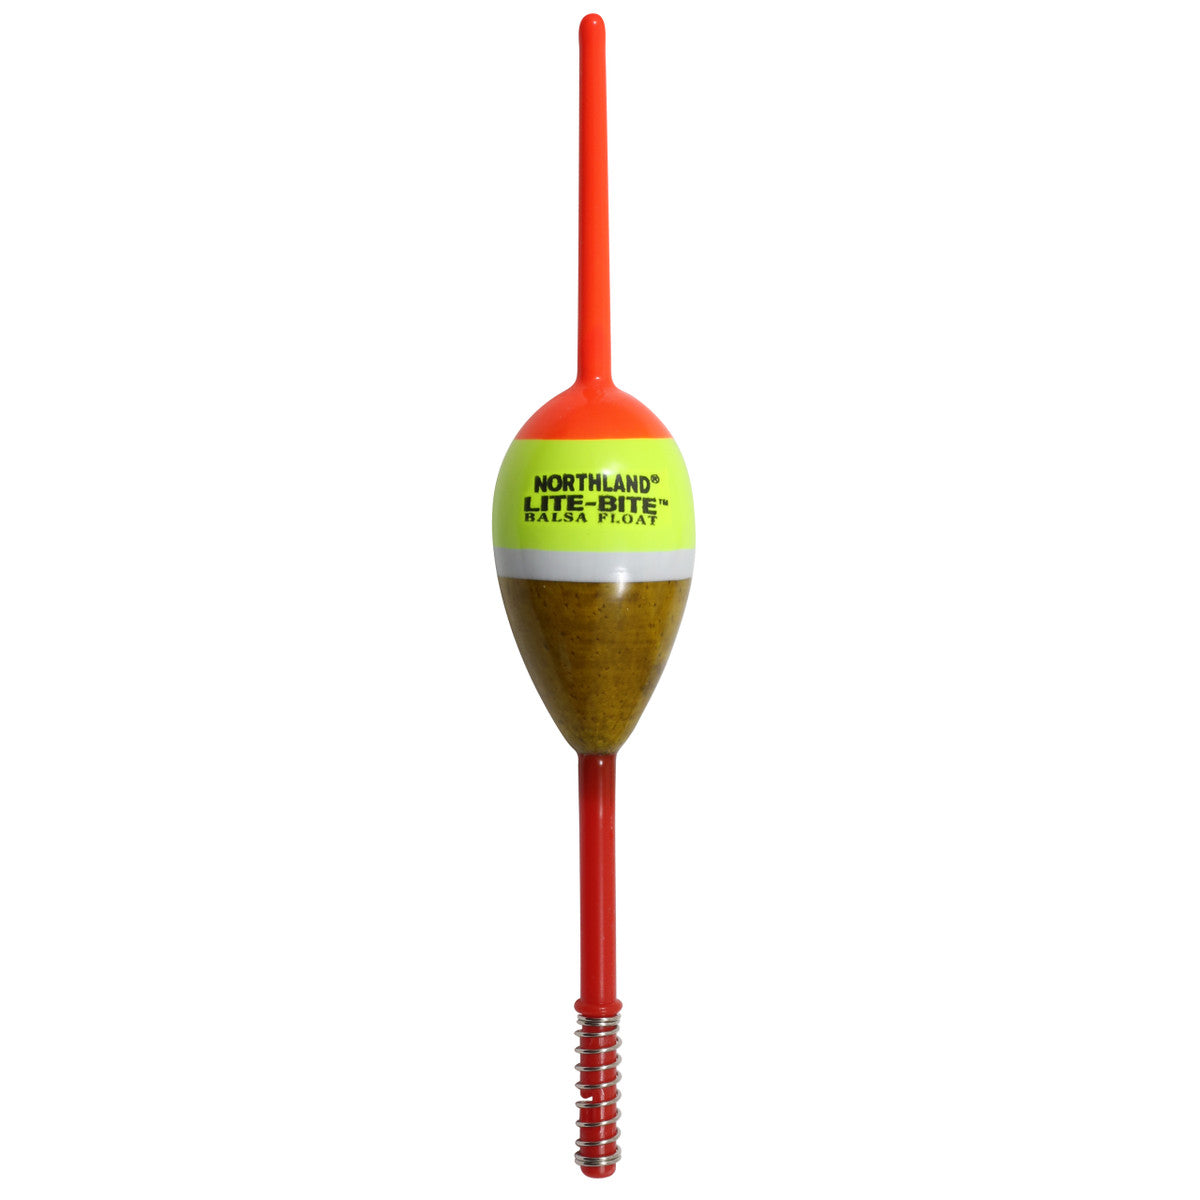 NORTHLAND LITE-BITE OVAL SPRING FLOAT - TWO KINDS OF DIAMETER AVAILABLE